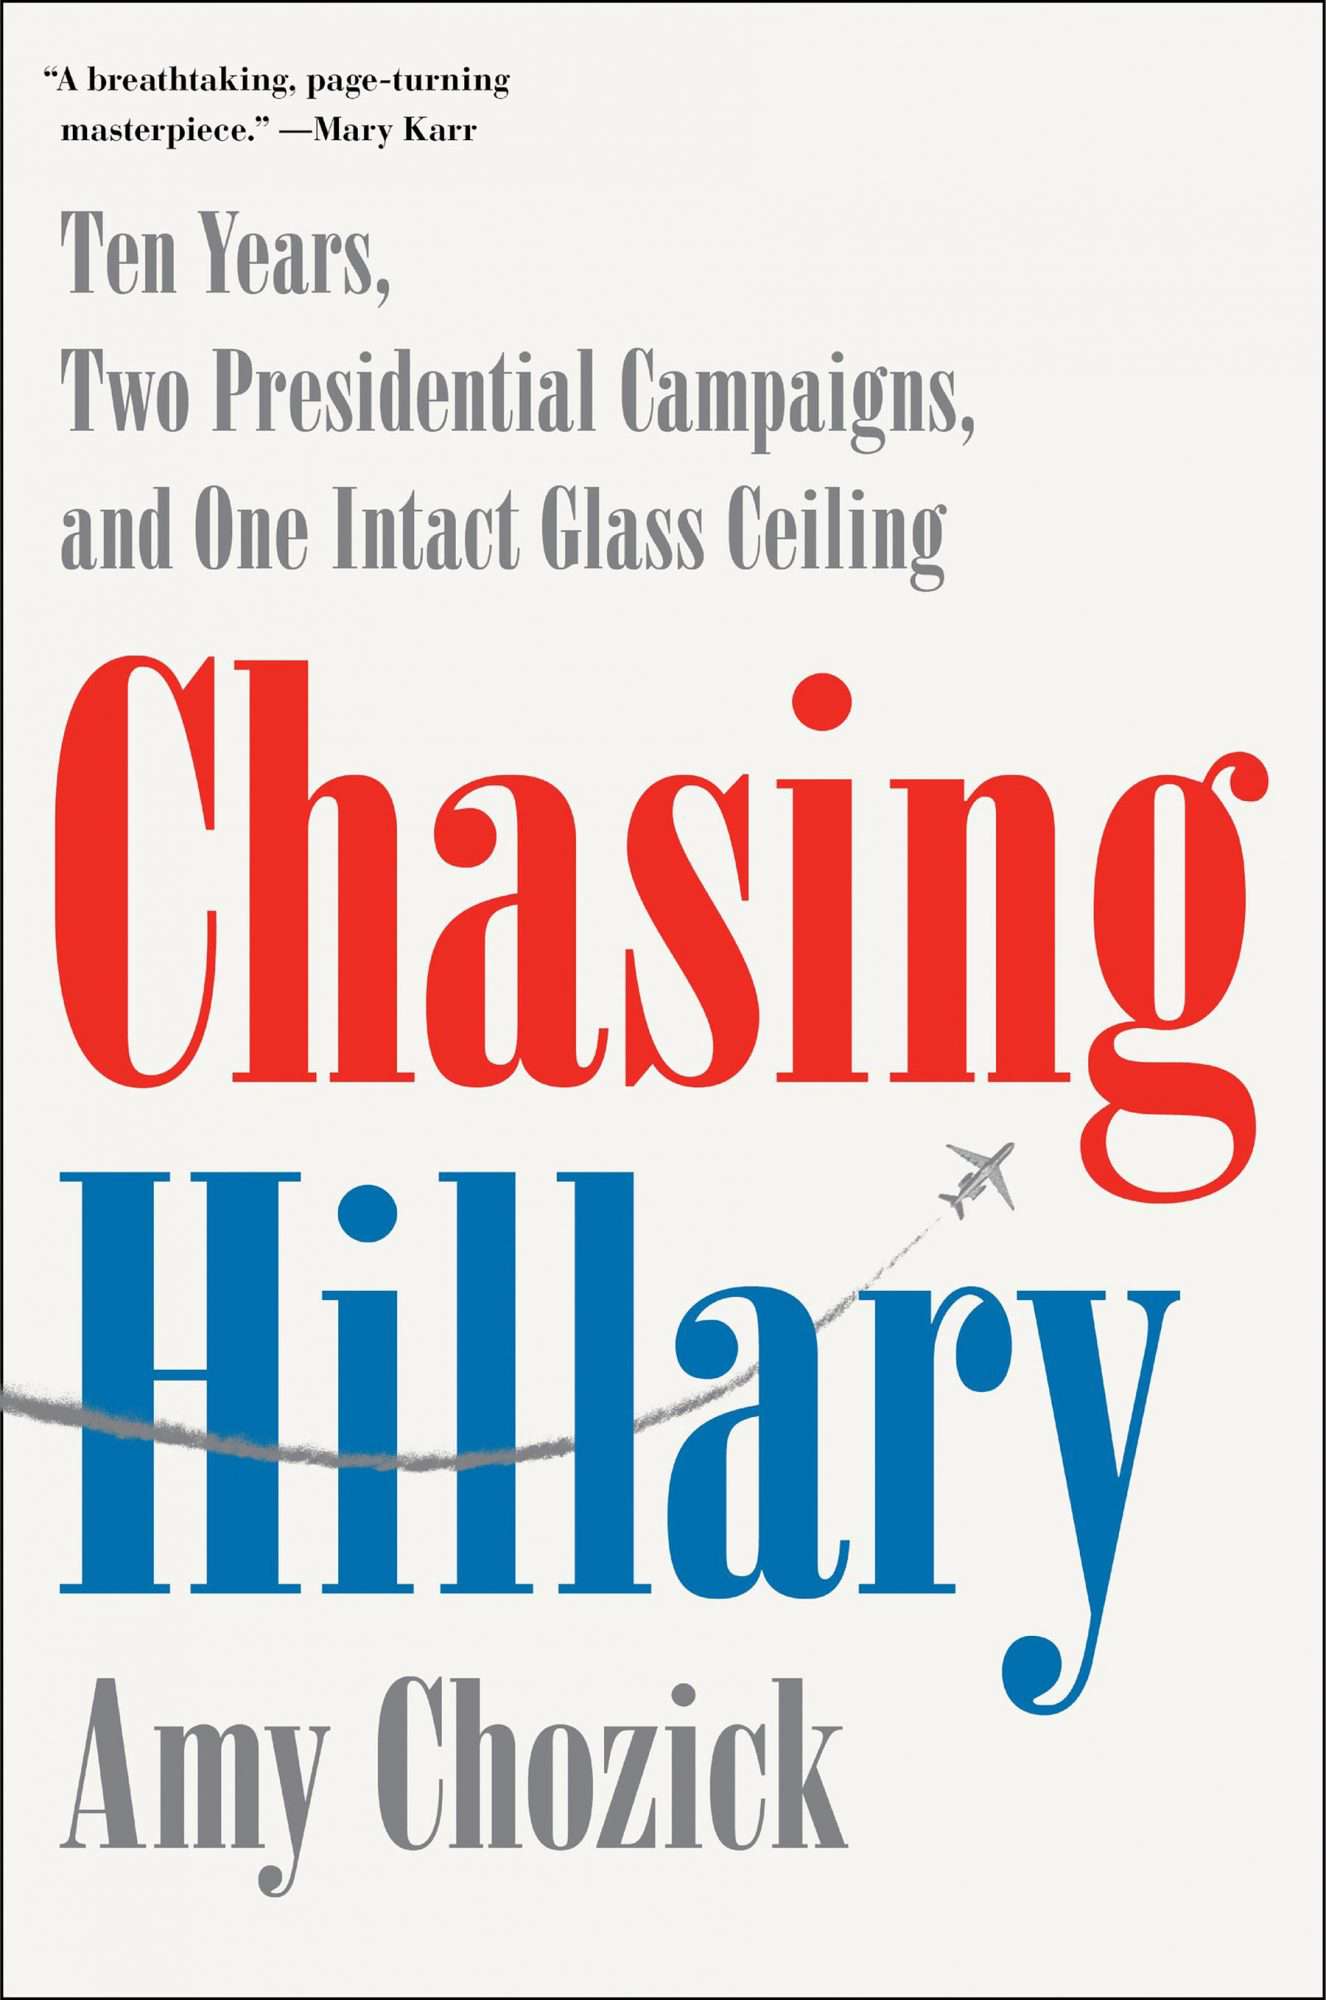 Chasing Hillary&nbsp;by Amy Chozick